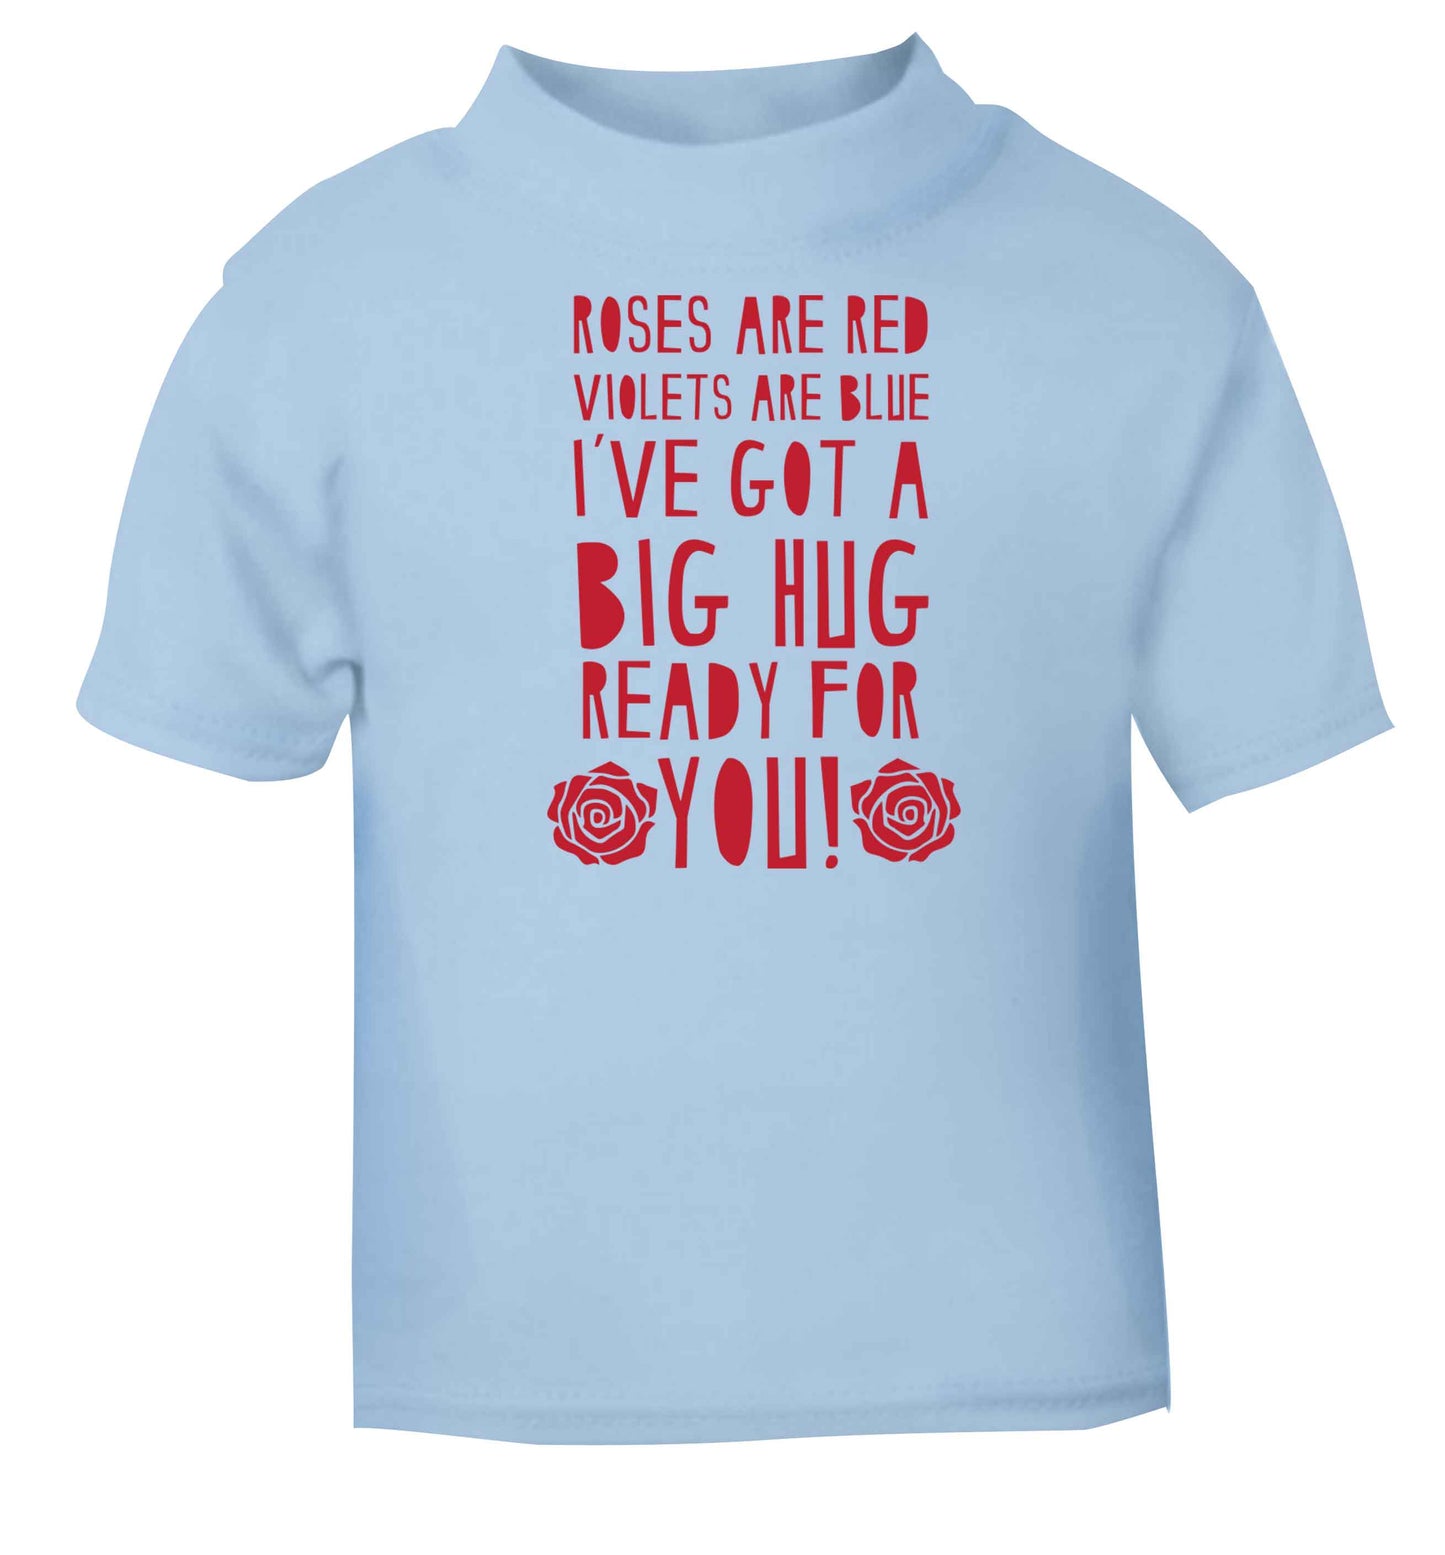 Roses are red violets are blue I've got a big hug coming for you light blue baby toddler Tshirt 2 Years